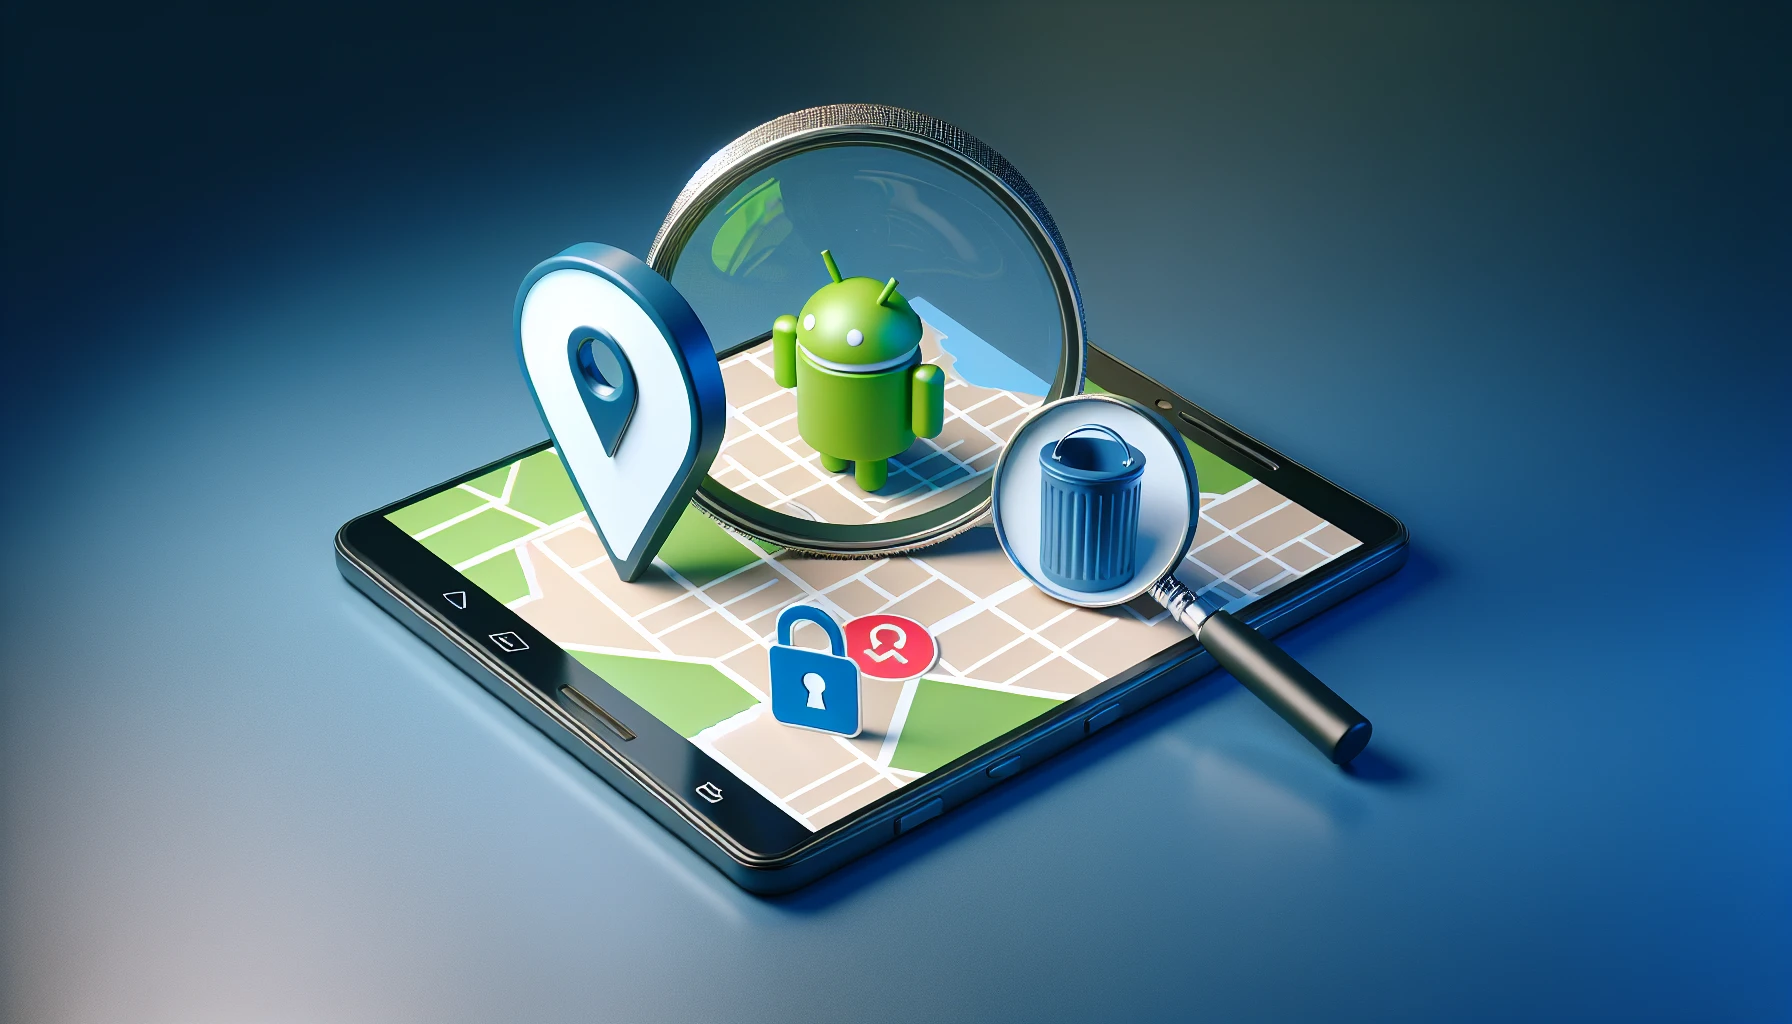 Illustration of tracking an Android phone using 'Find My Device'